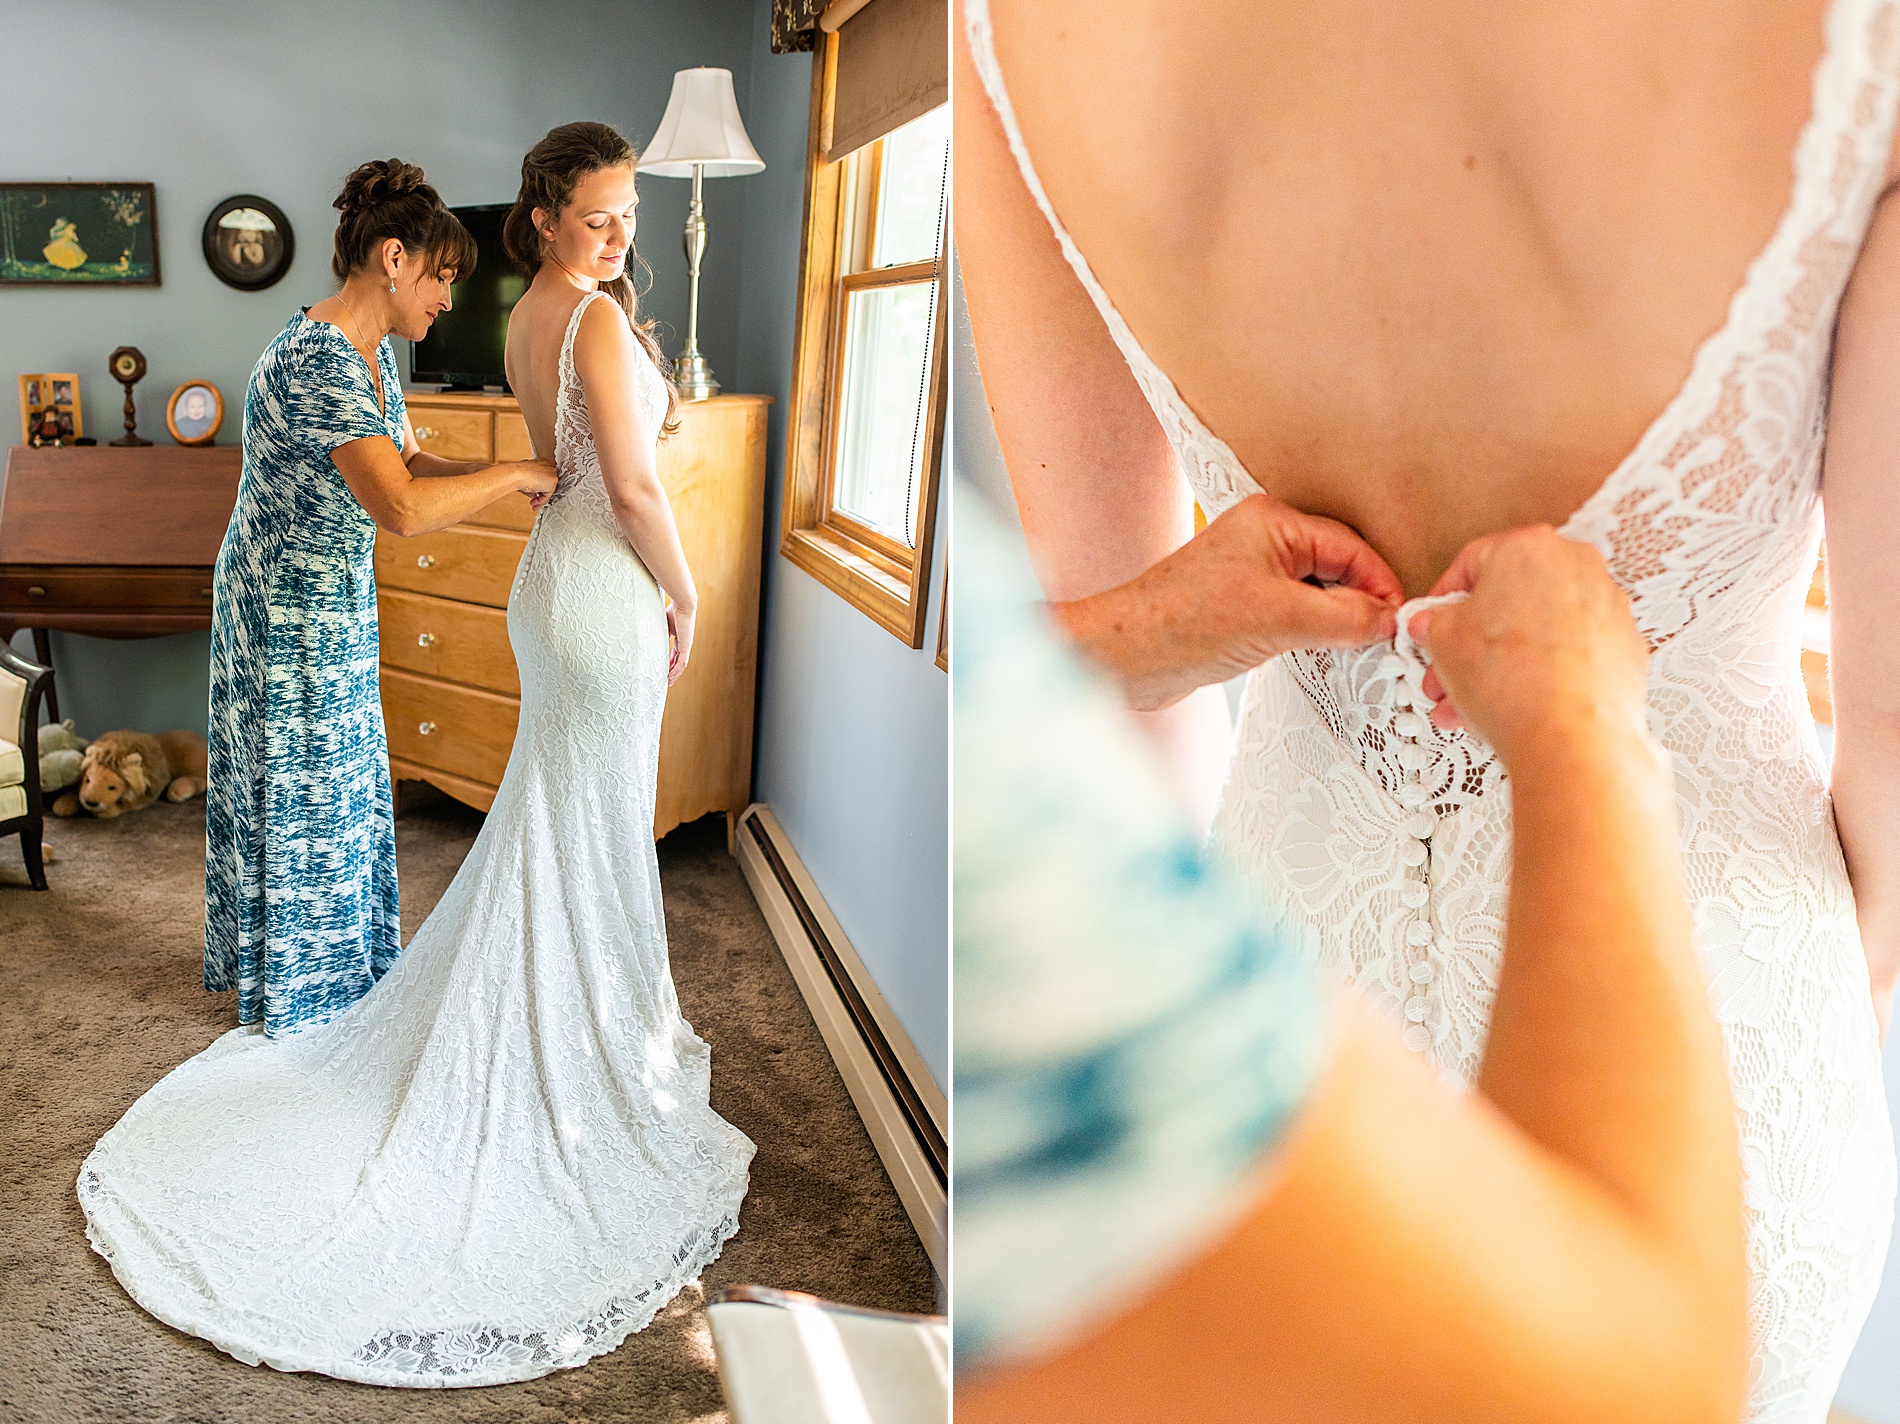 bride getting her wedding dress on with her mom